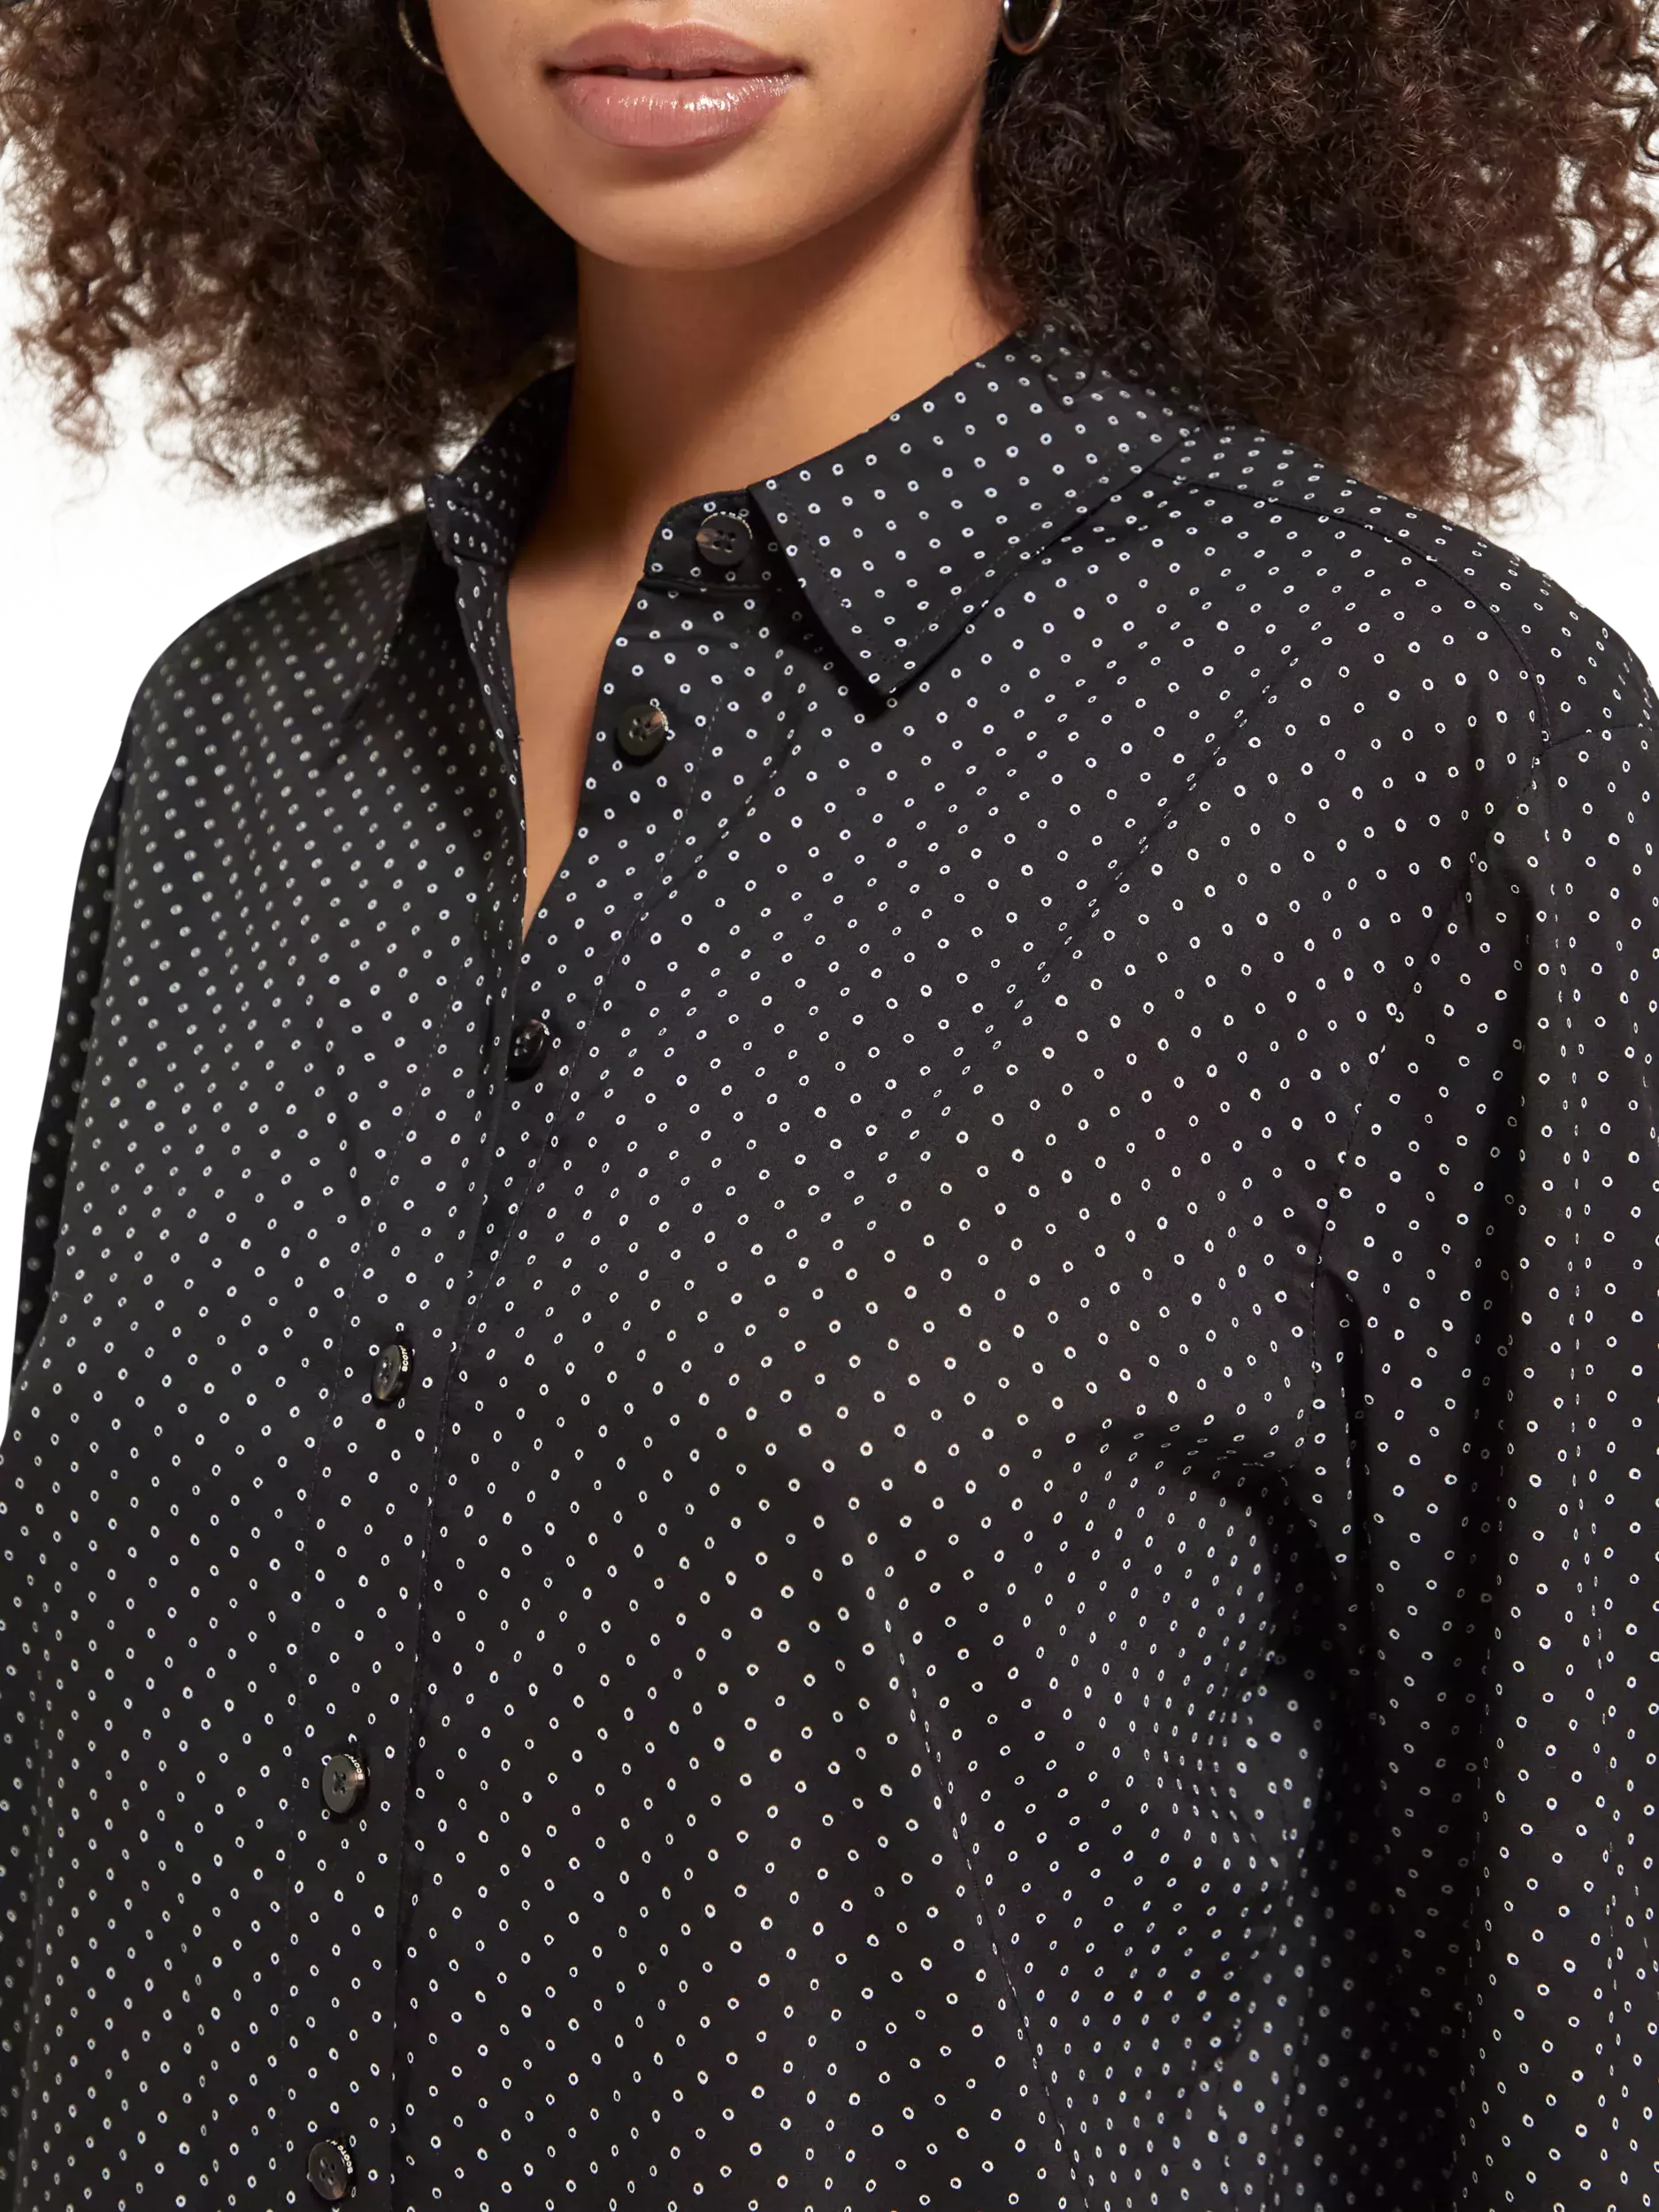 Scotch&Soda All over printed relaxed fit Bluse in schwarz 